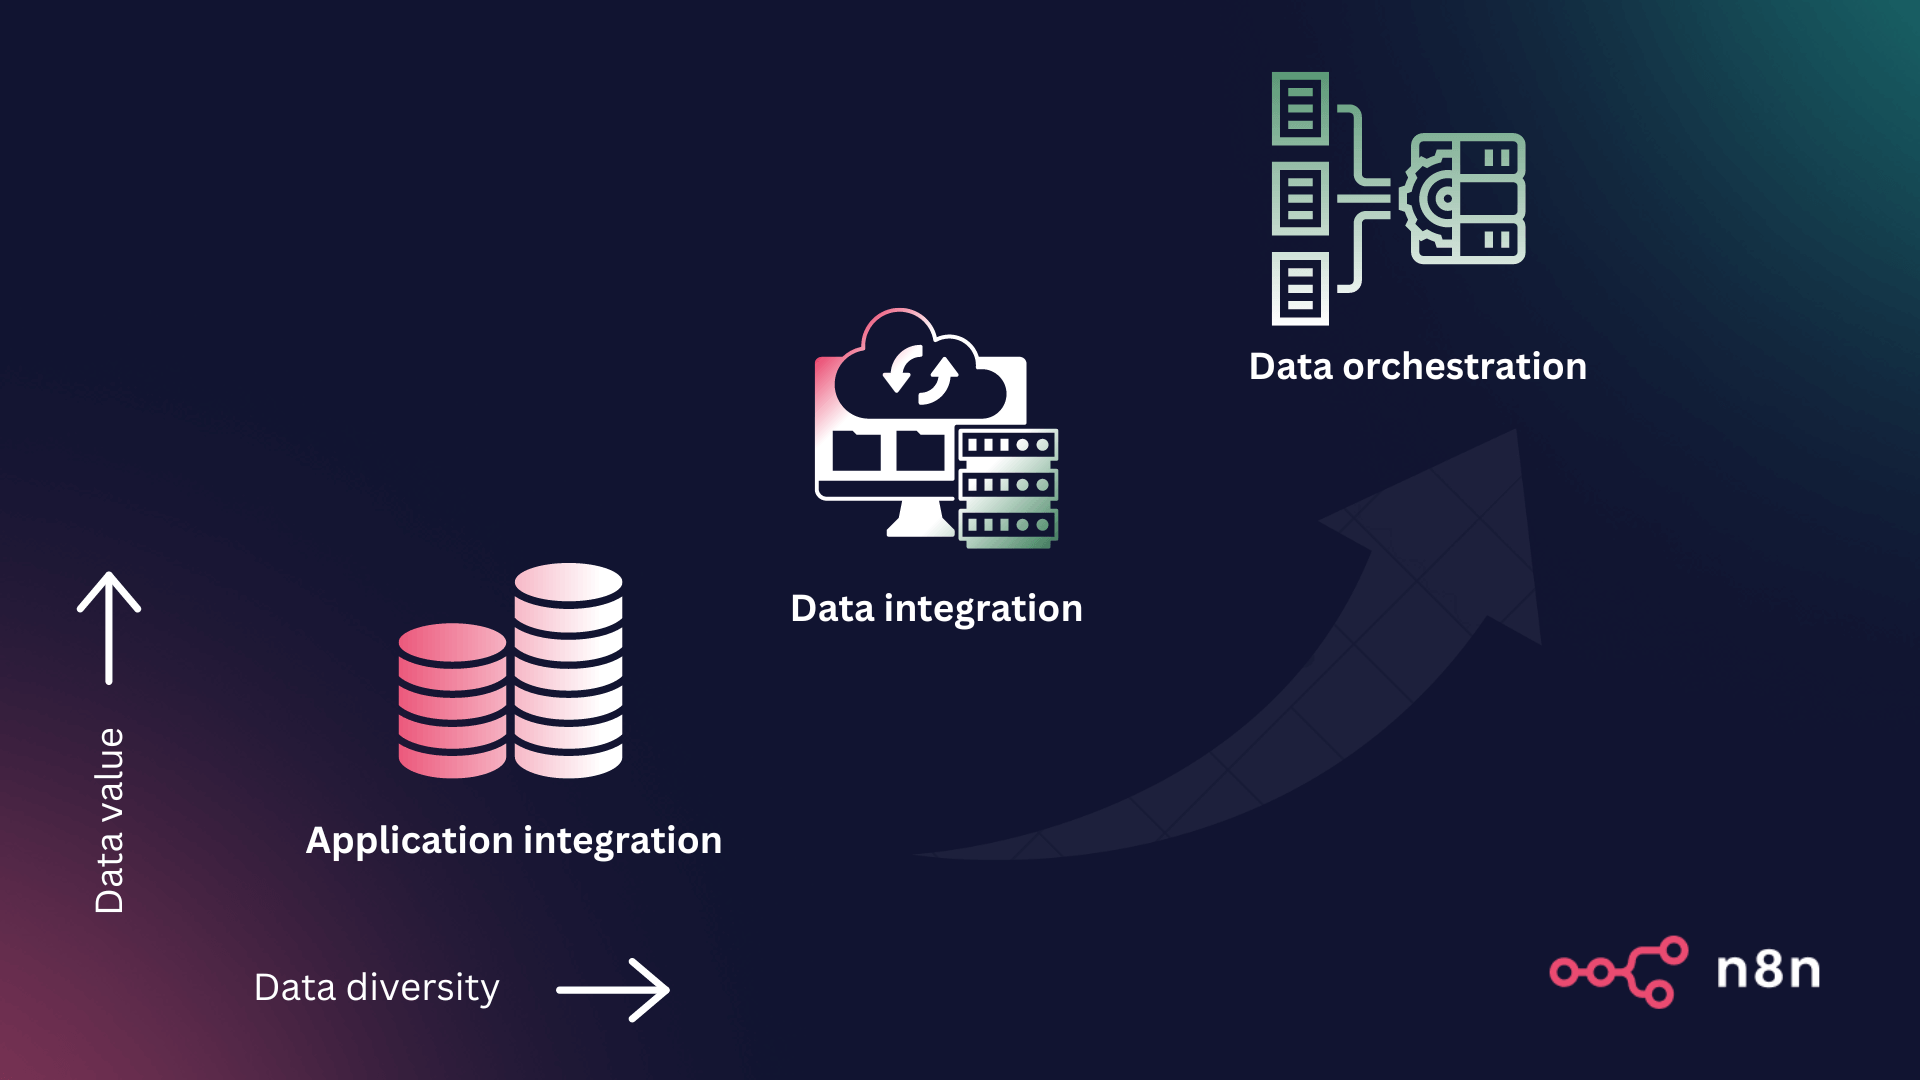 Evolution of data management domains in the enterprise. Adapted from: Managing Data Orchestration and Integration at Scale